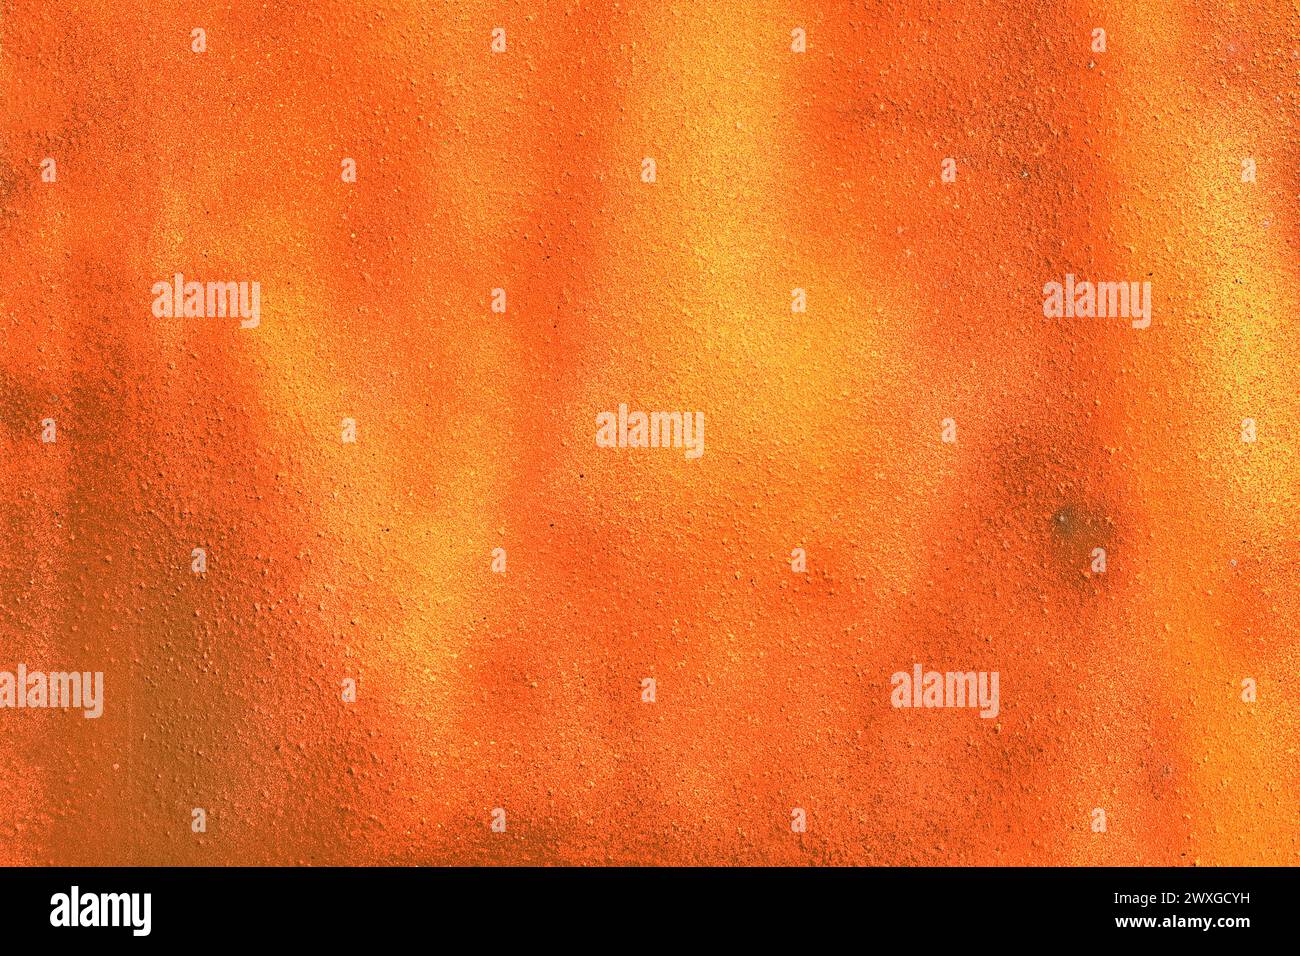 Bright orange vibrant paint abstract pattern surface wall texture background color. Stock Photo